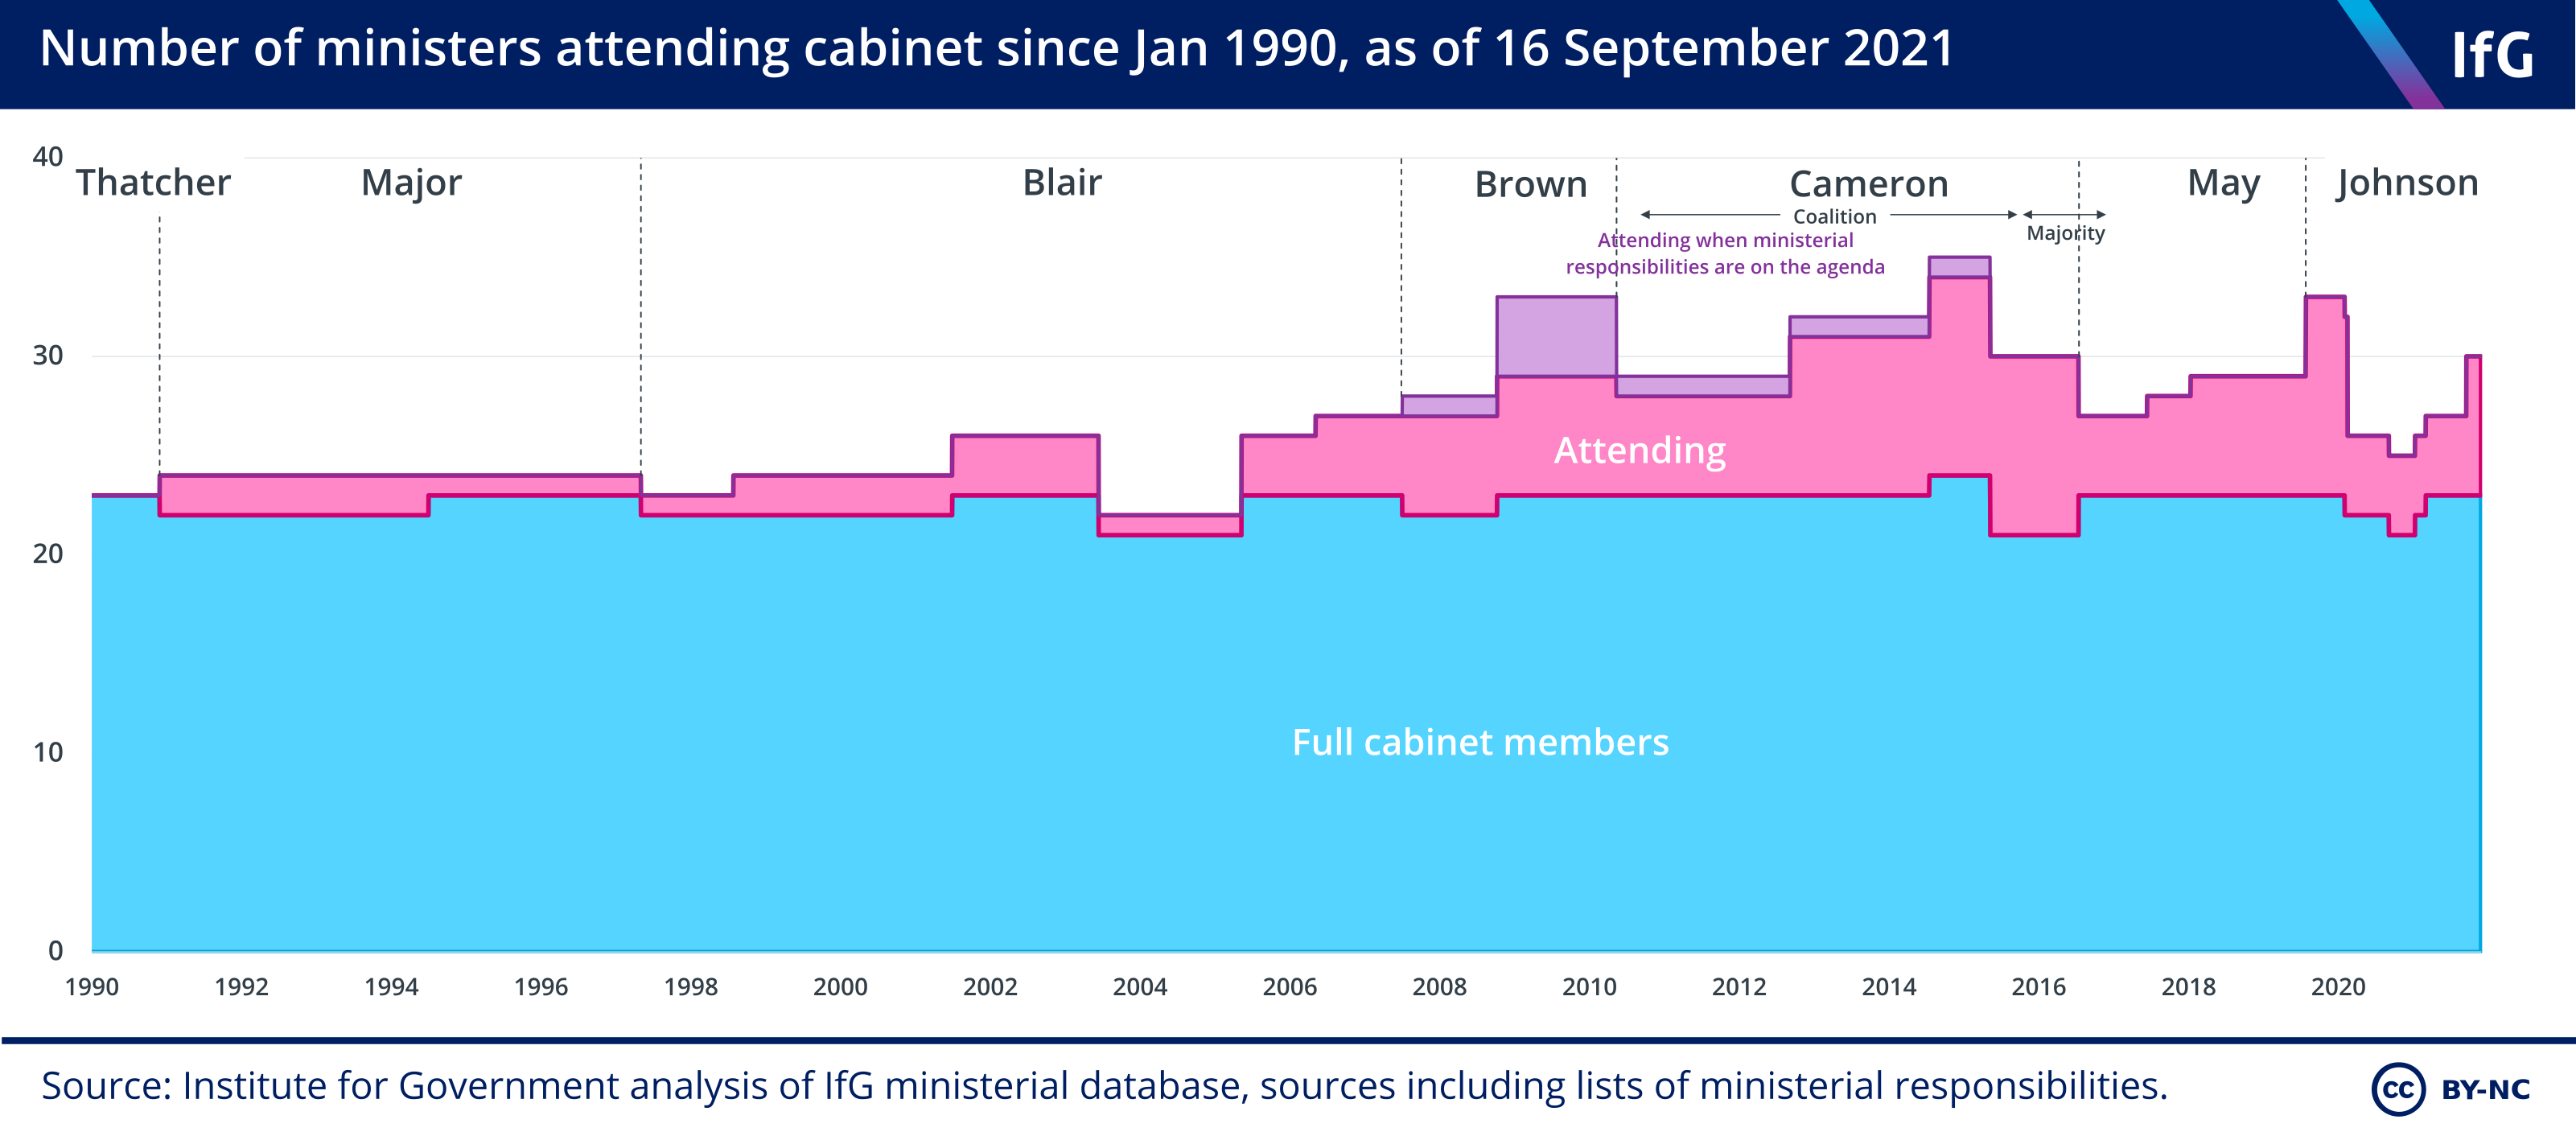 Number of ministers attending cabinet